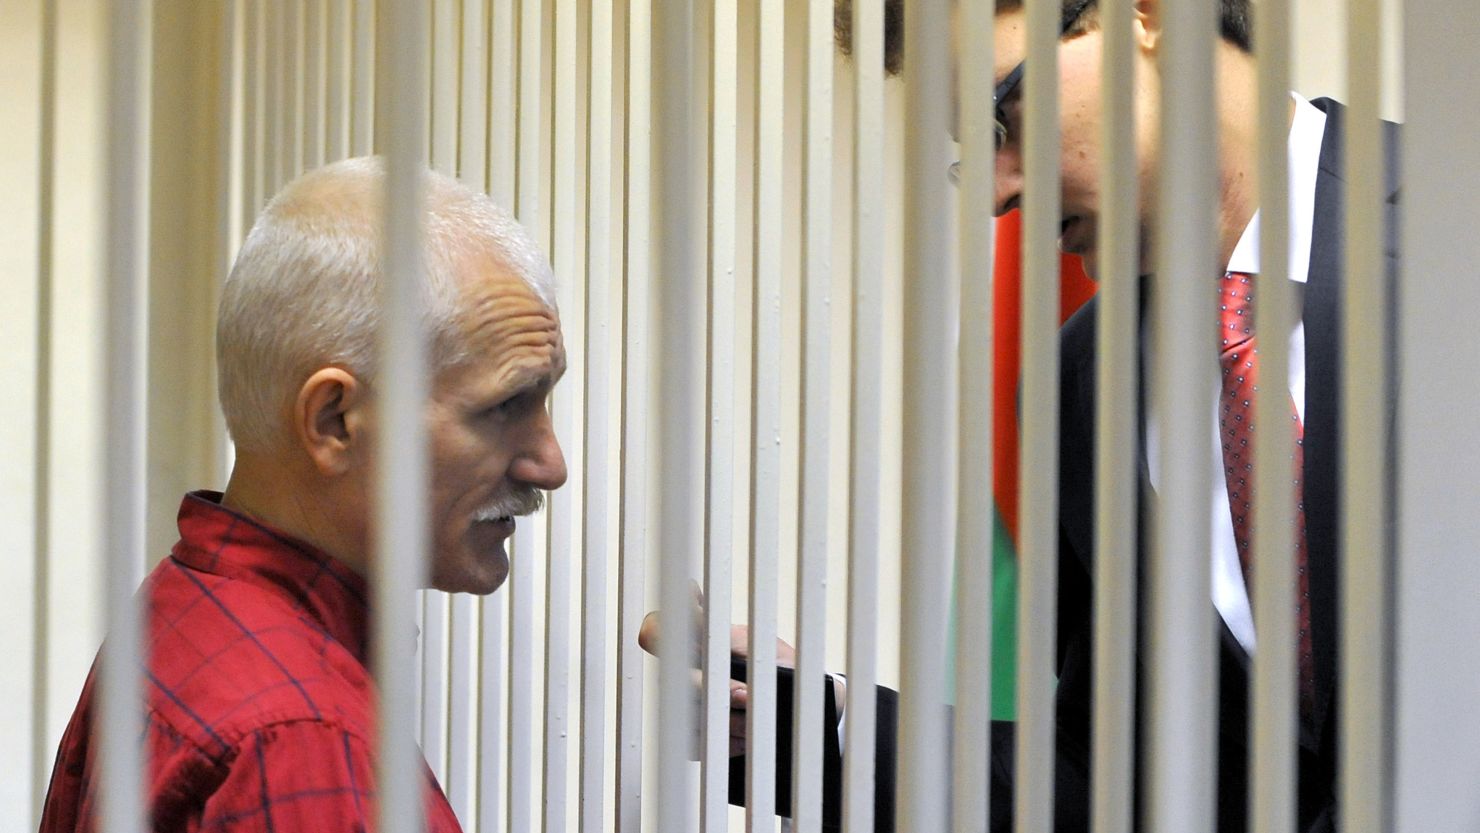 The head of Viasna Human Rights Center, Ales Bialiatski, speaks with his lawyer from the defendant's cage in a court in Minsk, on November 24, 2011.